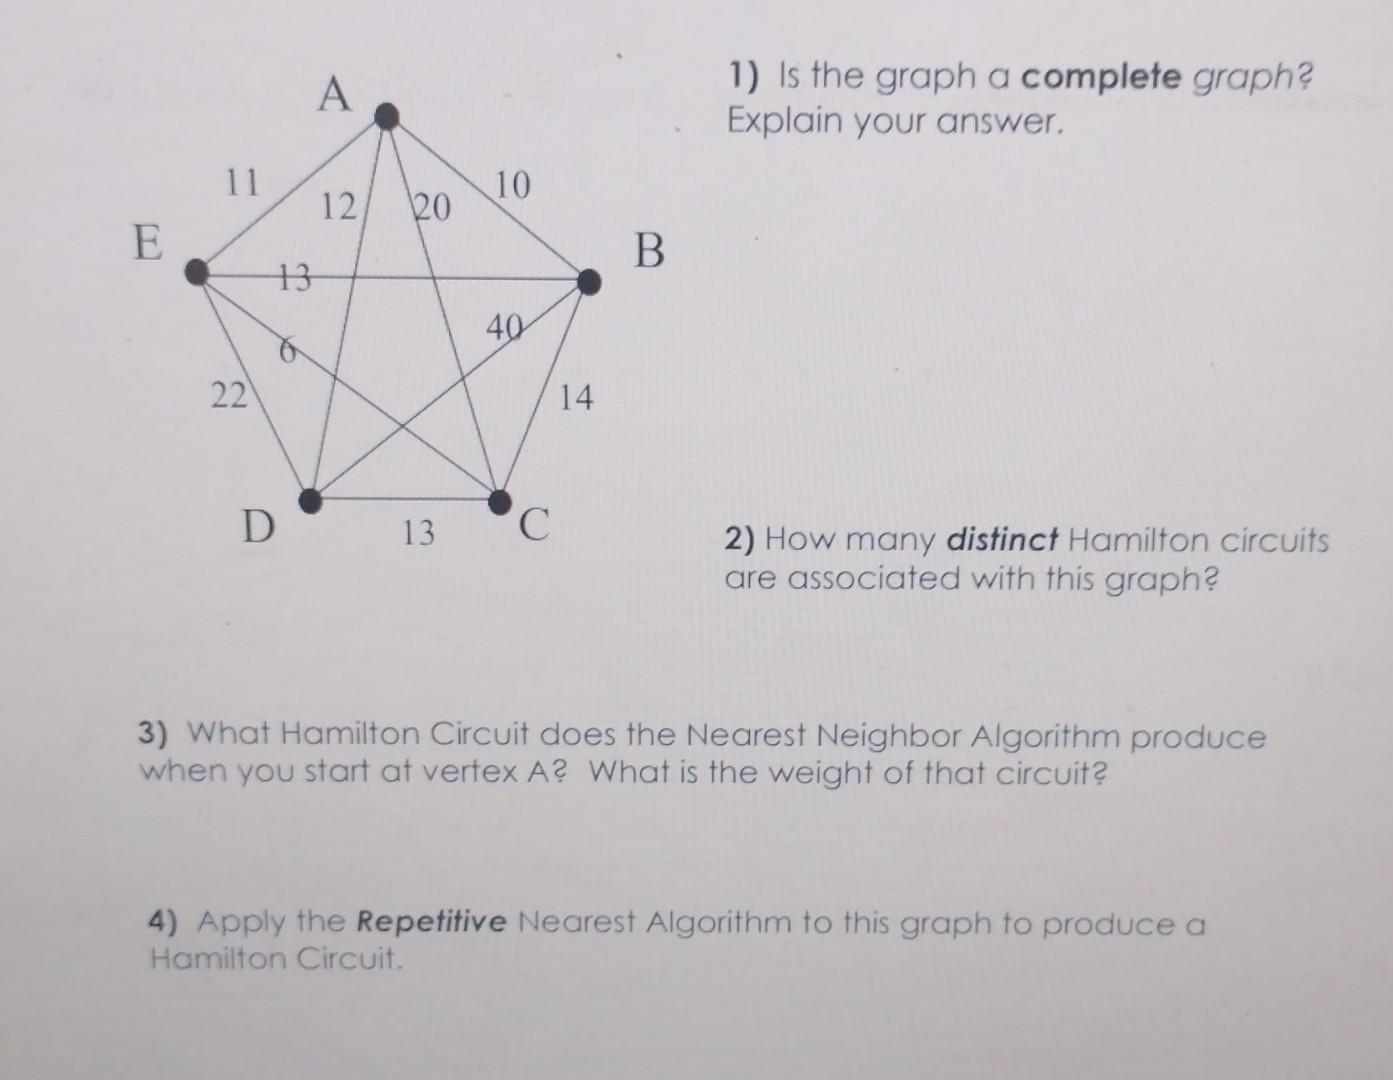 E 11 22 A 13 D 12 20 13 10 40  14 B 1) Is the graph a complete graph? Explain your answer. 2) How many